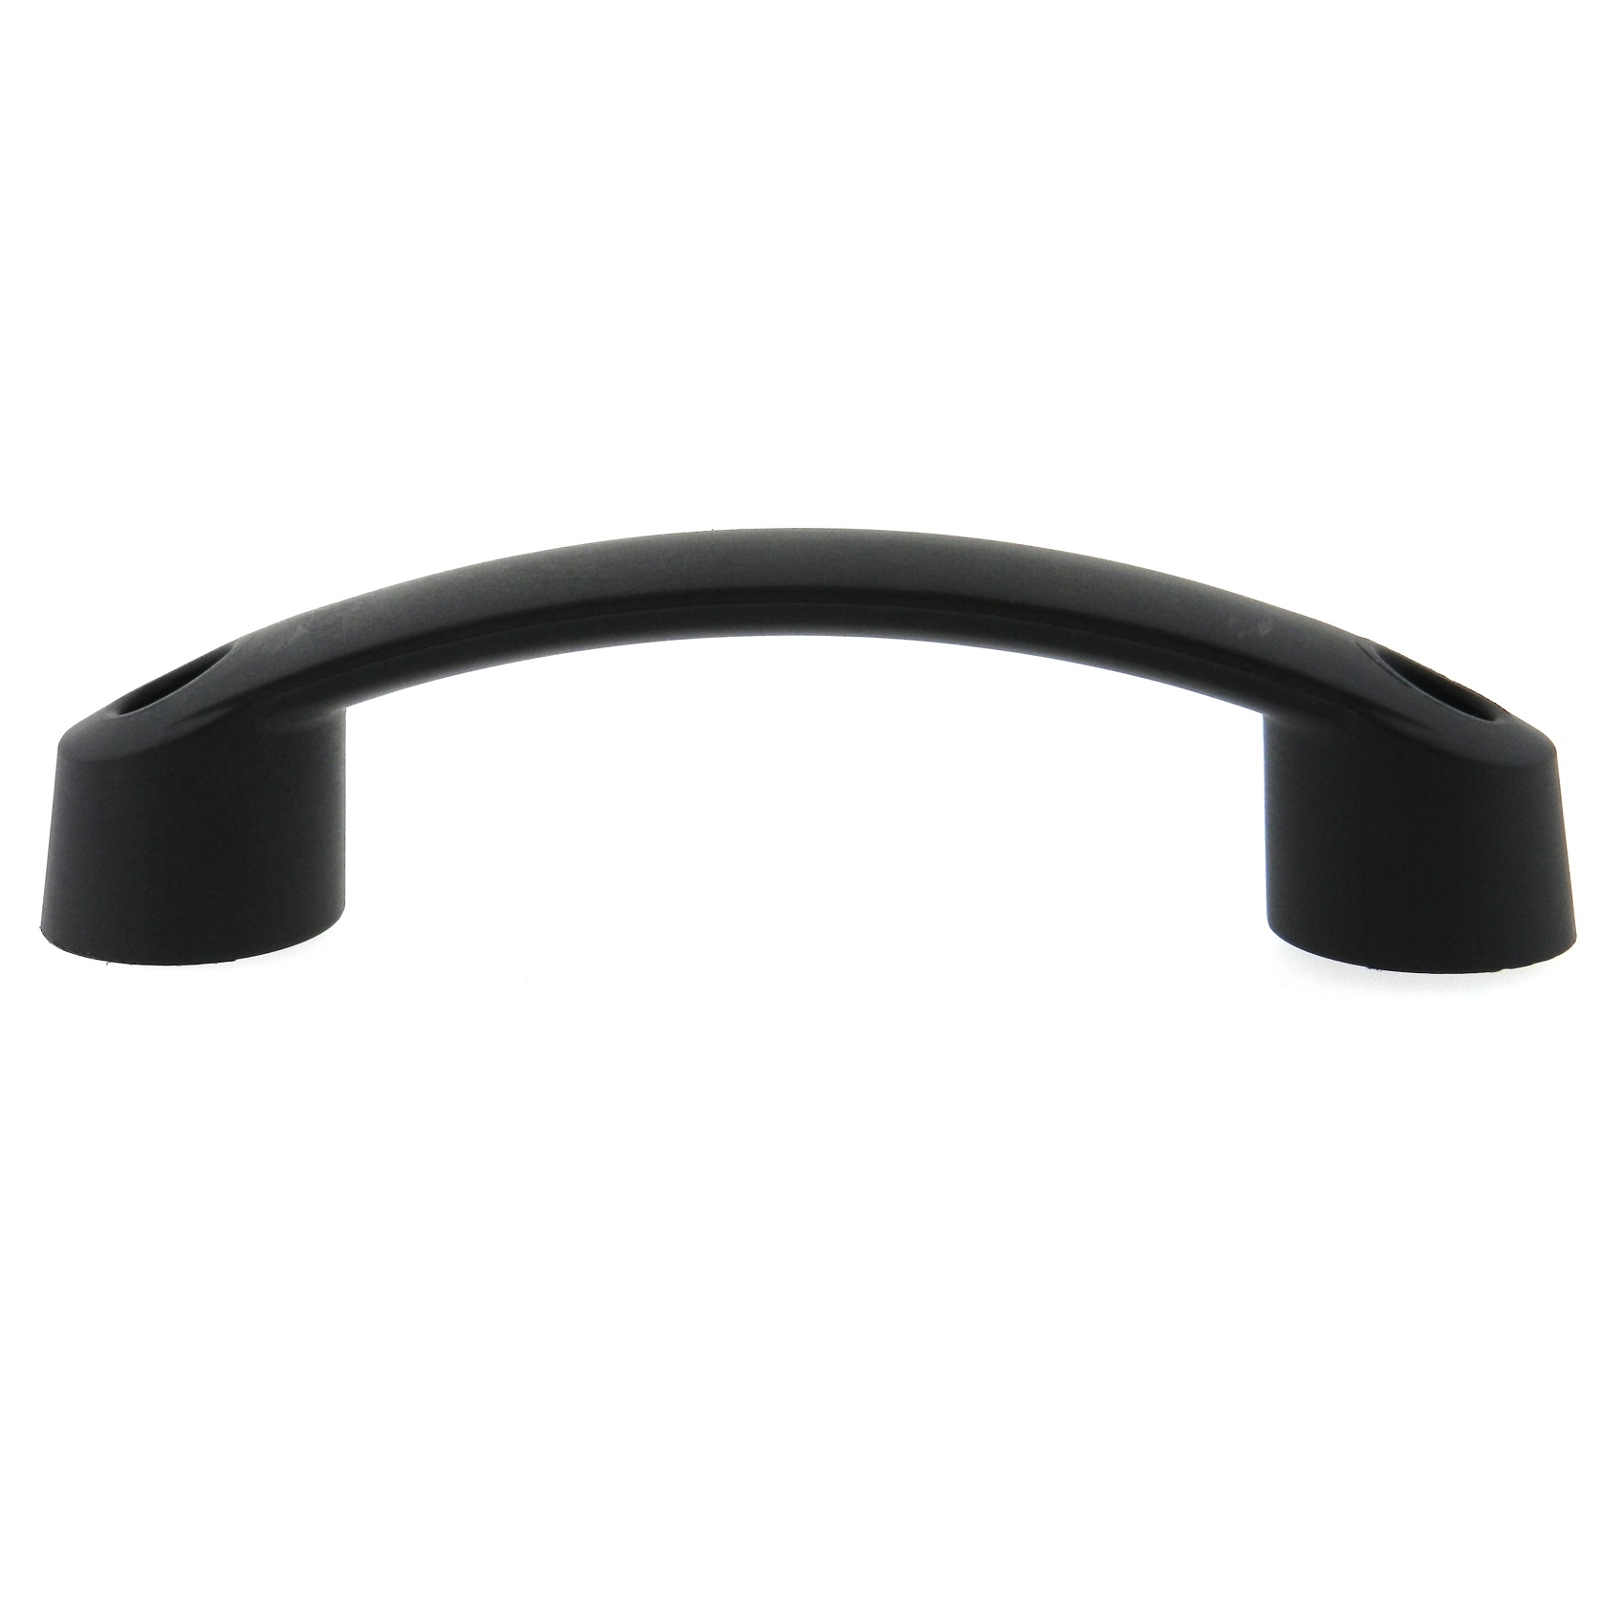 Pull Handles, Plastic Handles, Thermoplastic, Arch Handle